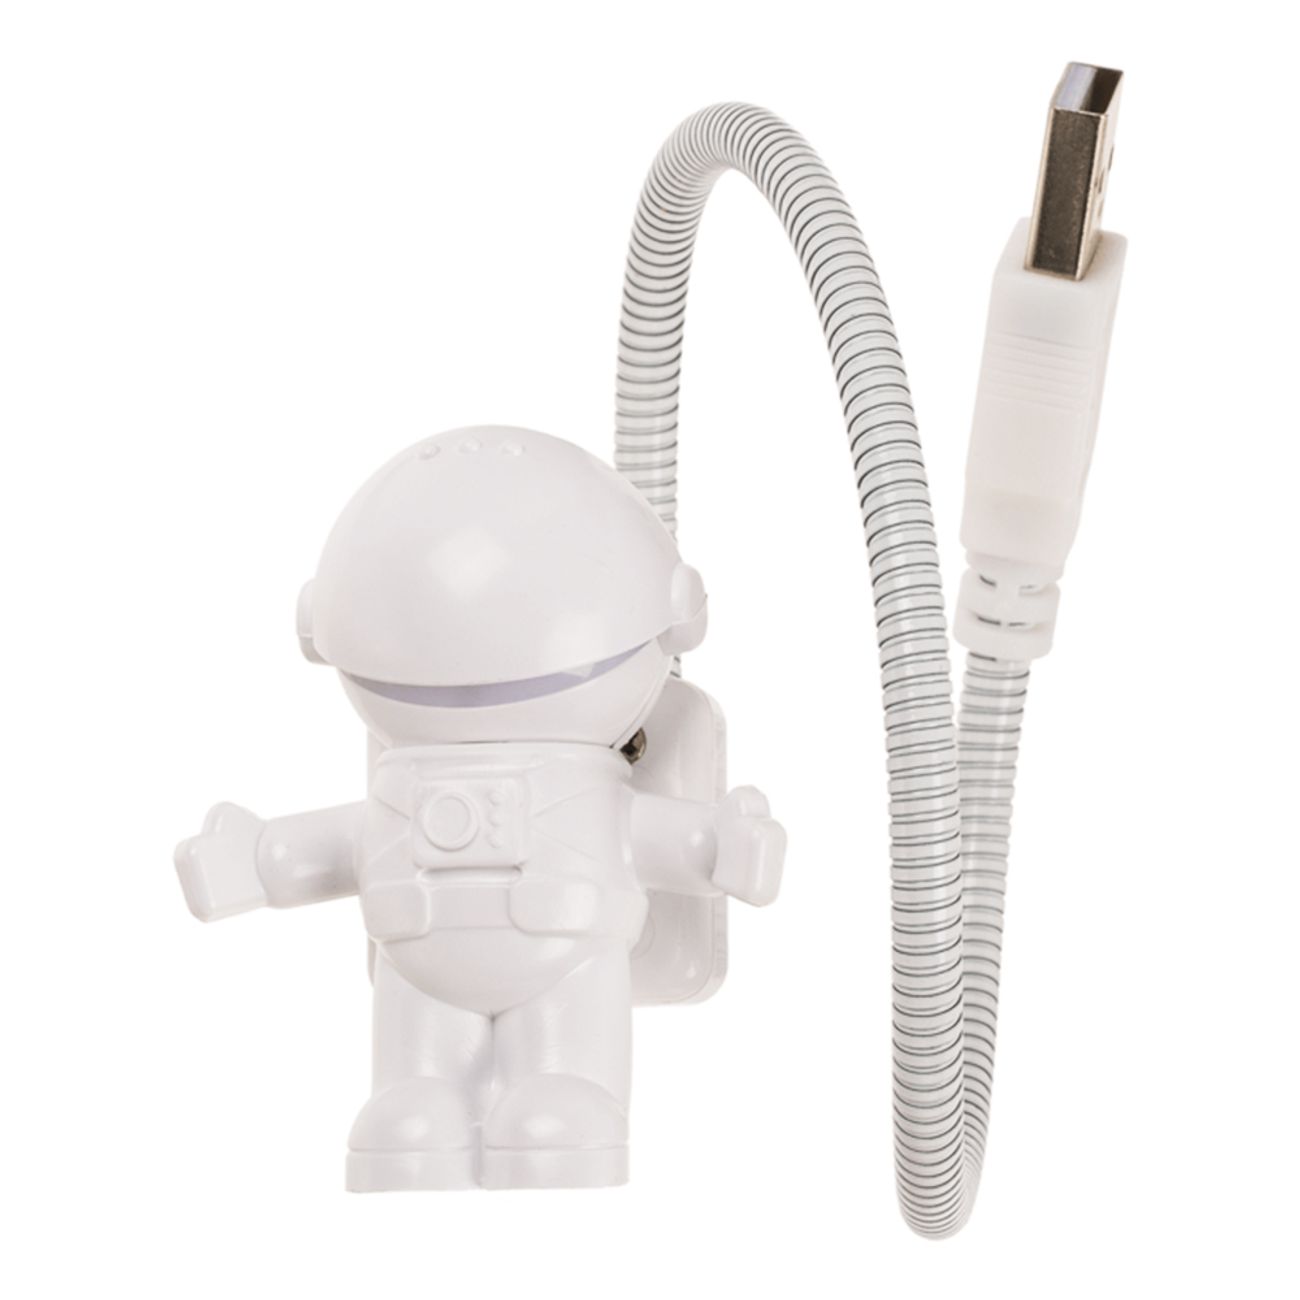 usb-led-astronaut-ca-7-x-335-cm-with-usb-cable--in-gift-box-100136-5